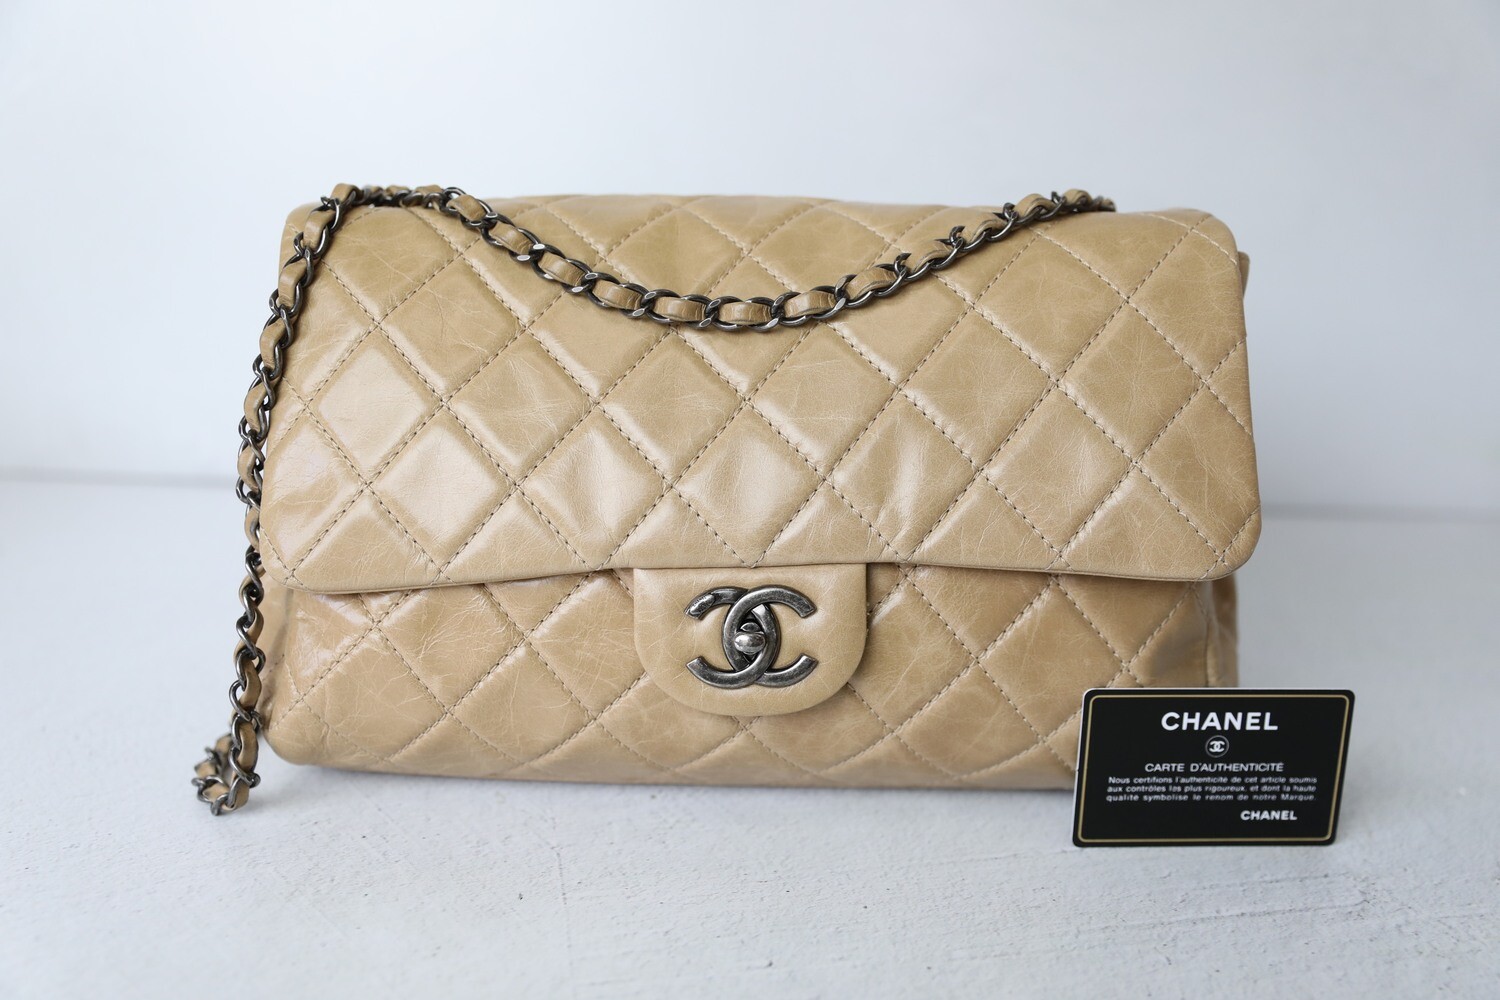 Chanel Chain Shopping Tote, Beige Calfskin with Gold Hardware, Preowned in  Box WA001 - Julia Rose Boston